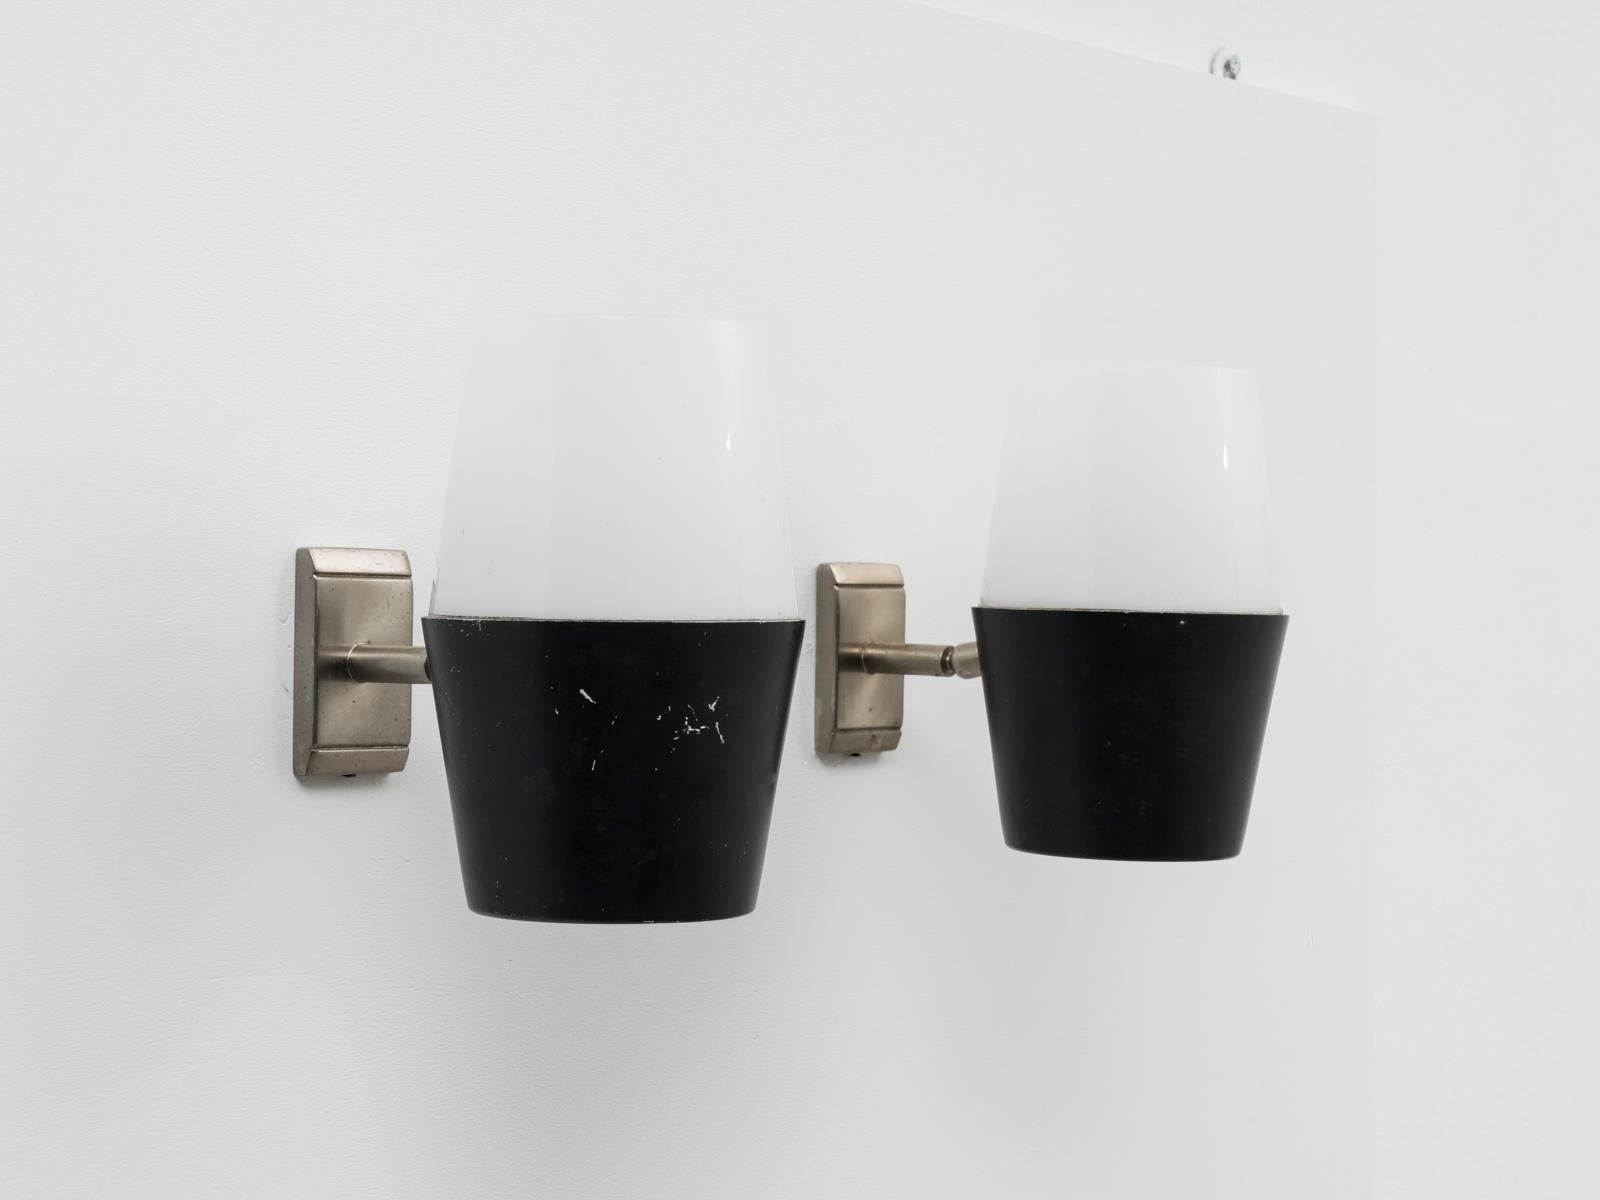 This pair of black and white articulated sconces was designed and manufactured by Stilux Milano in the early 1960s.
From the mid-1950s Stilux Milano was one of the leading Italian lighting manufactures together with Stilnovo, Arteluce, Arredoluce,